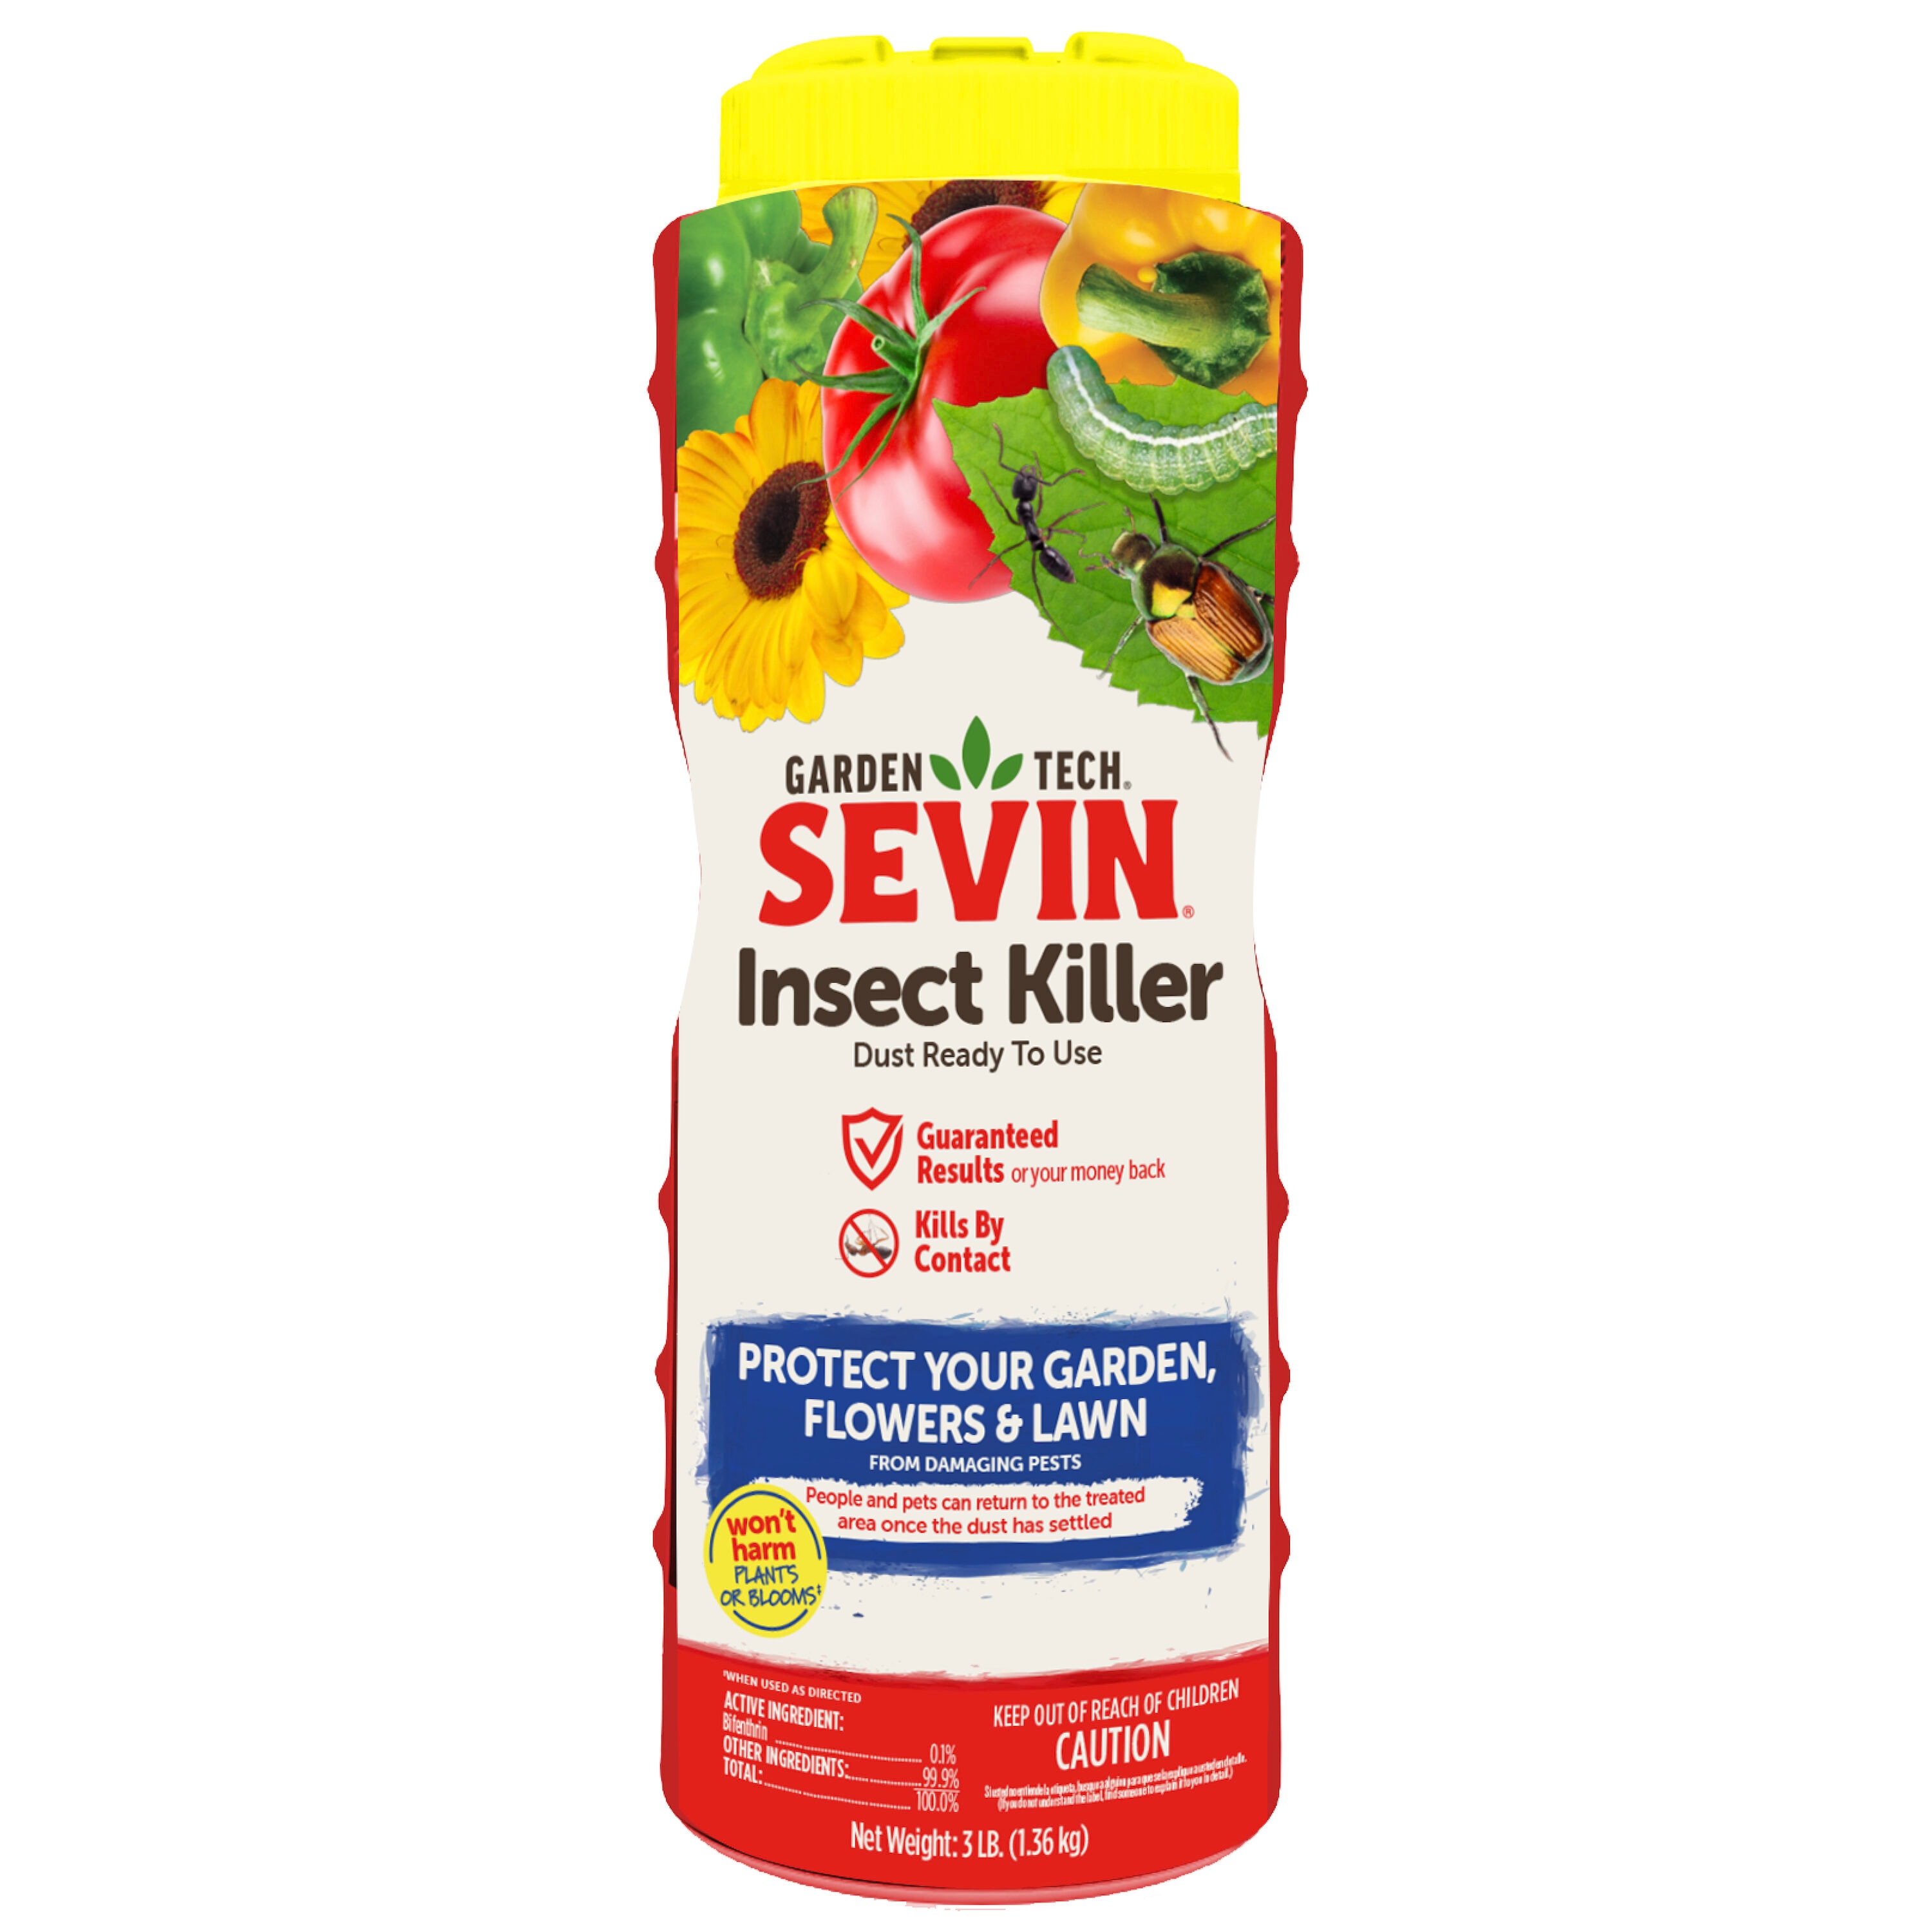 What Bugs Does Sevin Dust Kill: Destroy Pests Instantly!